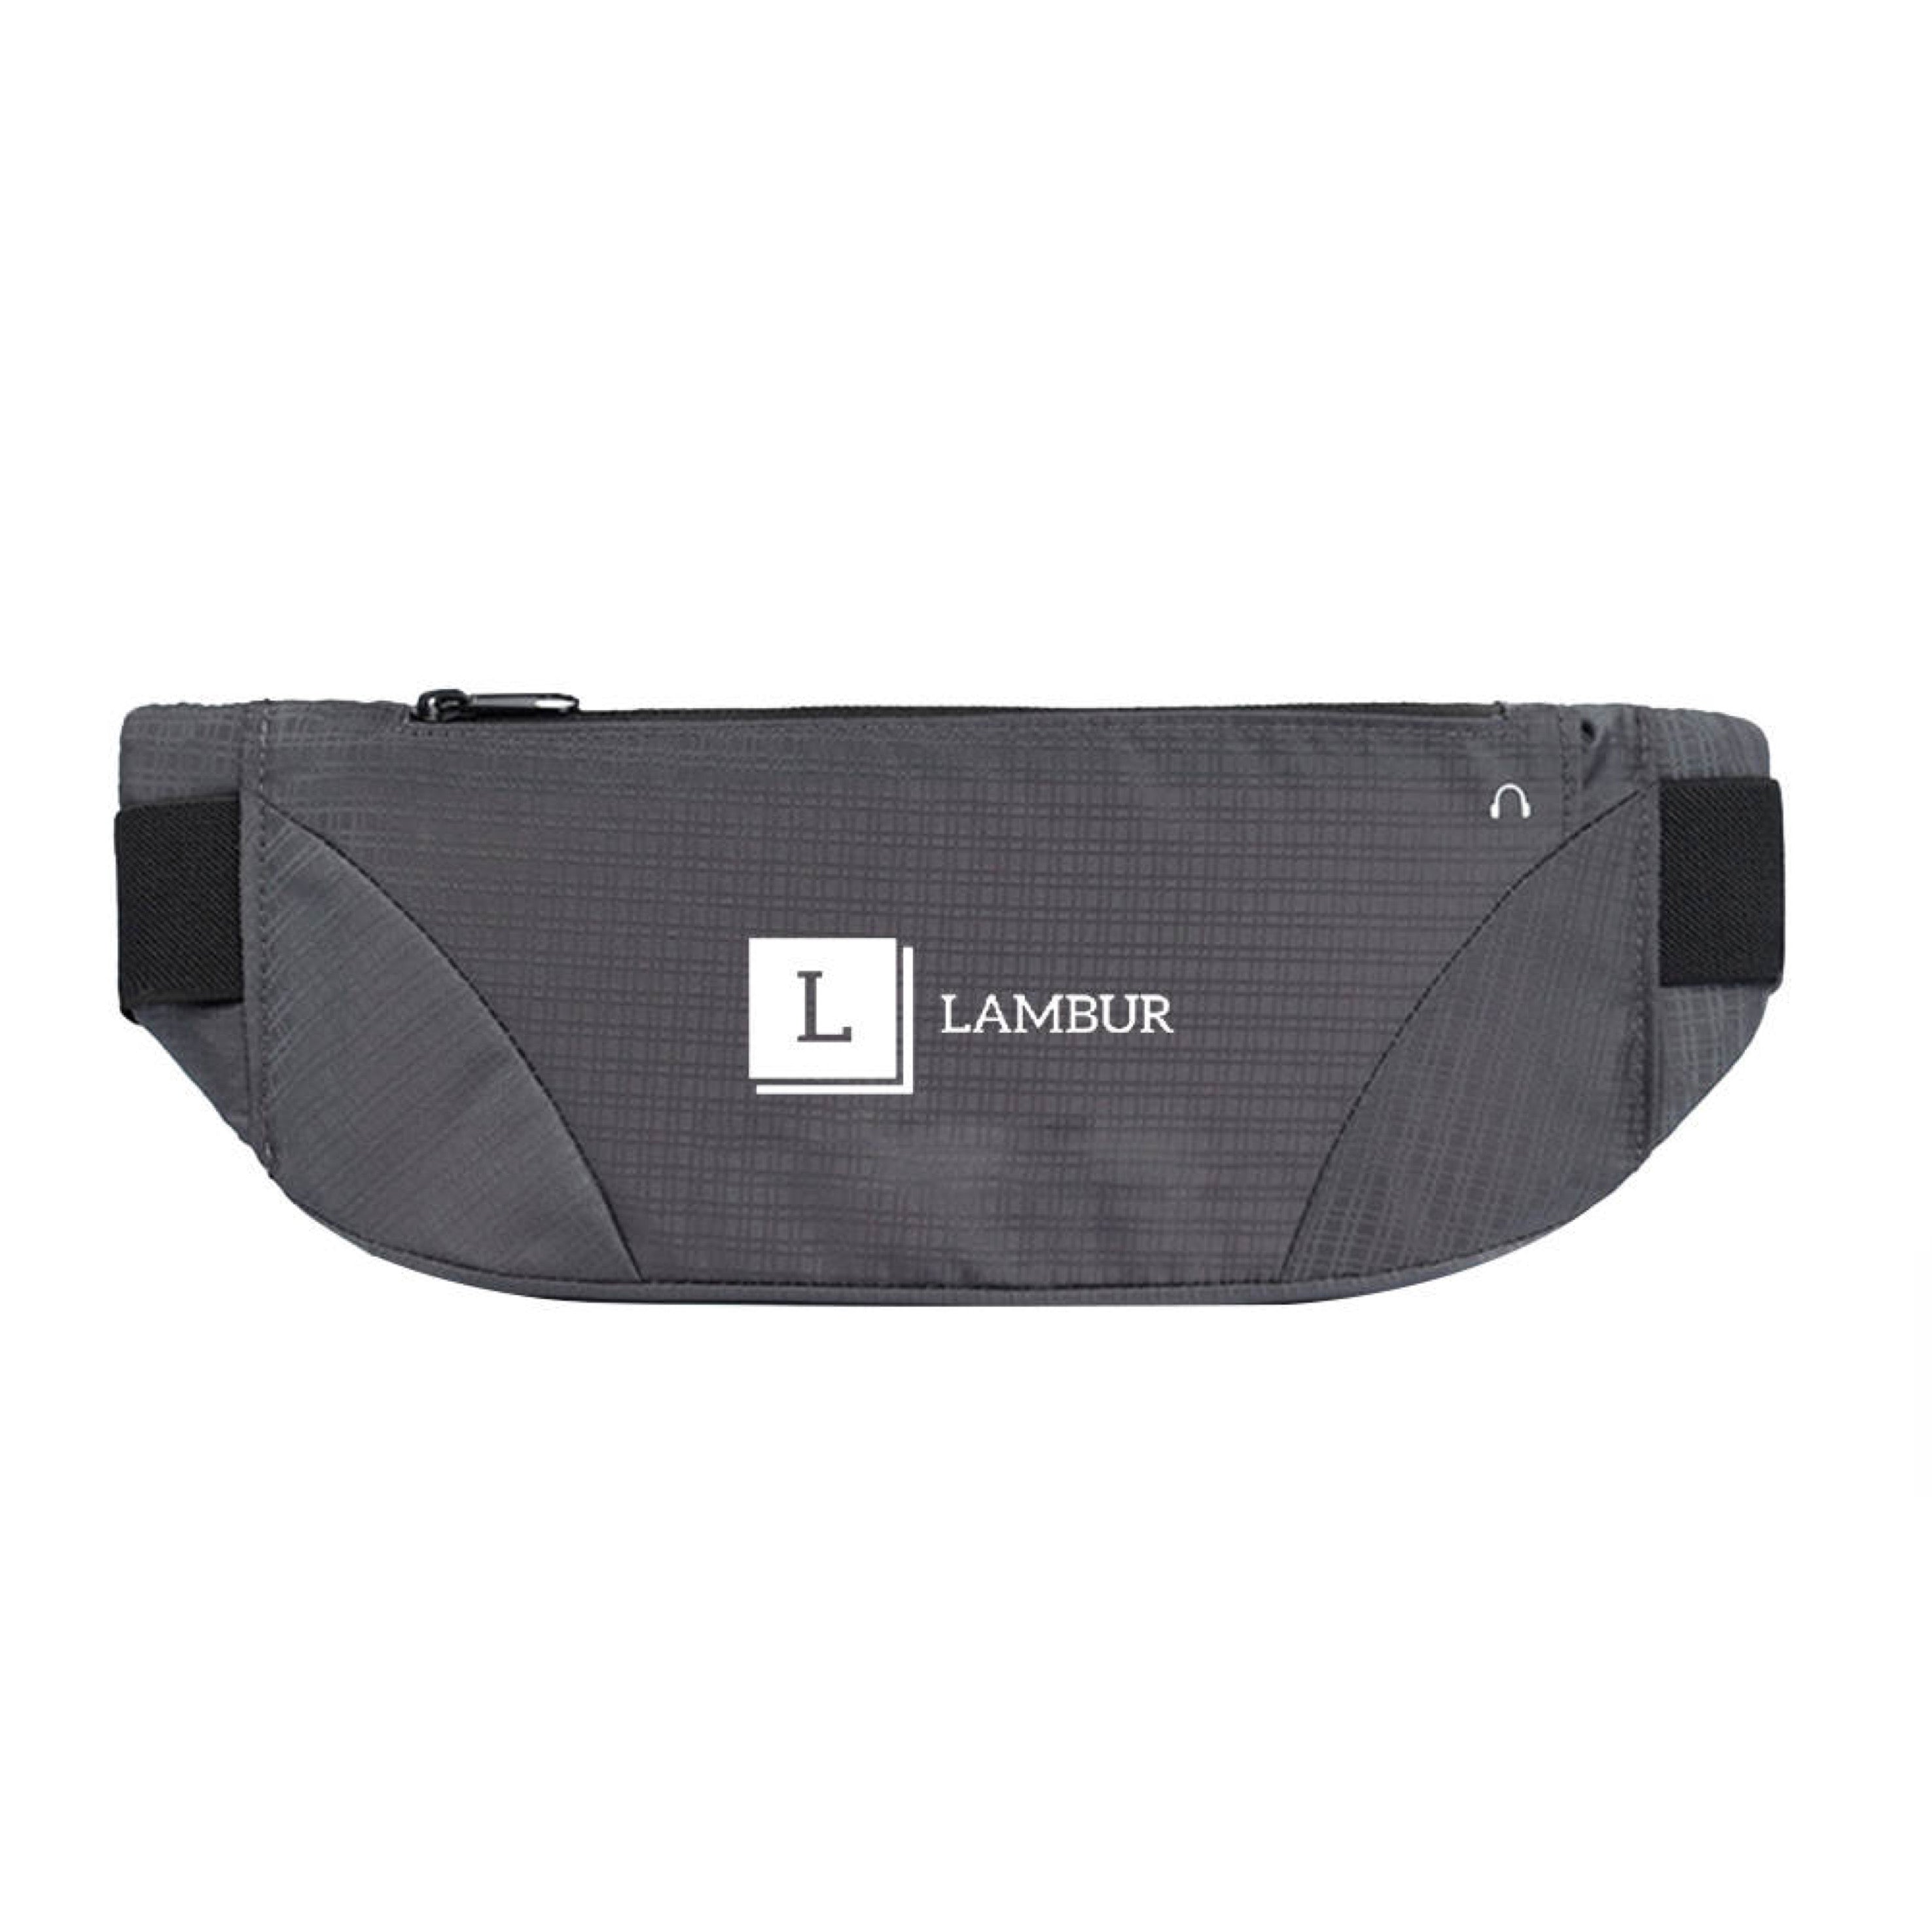 "Stylish and practical waist bag perfect for hands-free convenience. Ideal for urban adventures, travel, or daily commutes. Sleek design with ample storage compartments. A must-have accessory for the fashion-forward and on-the-go individuals!"